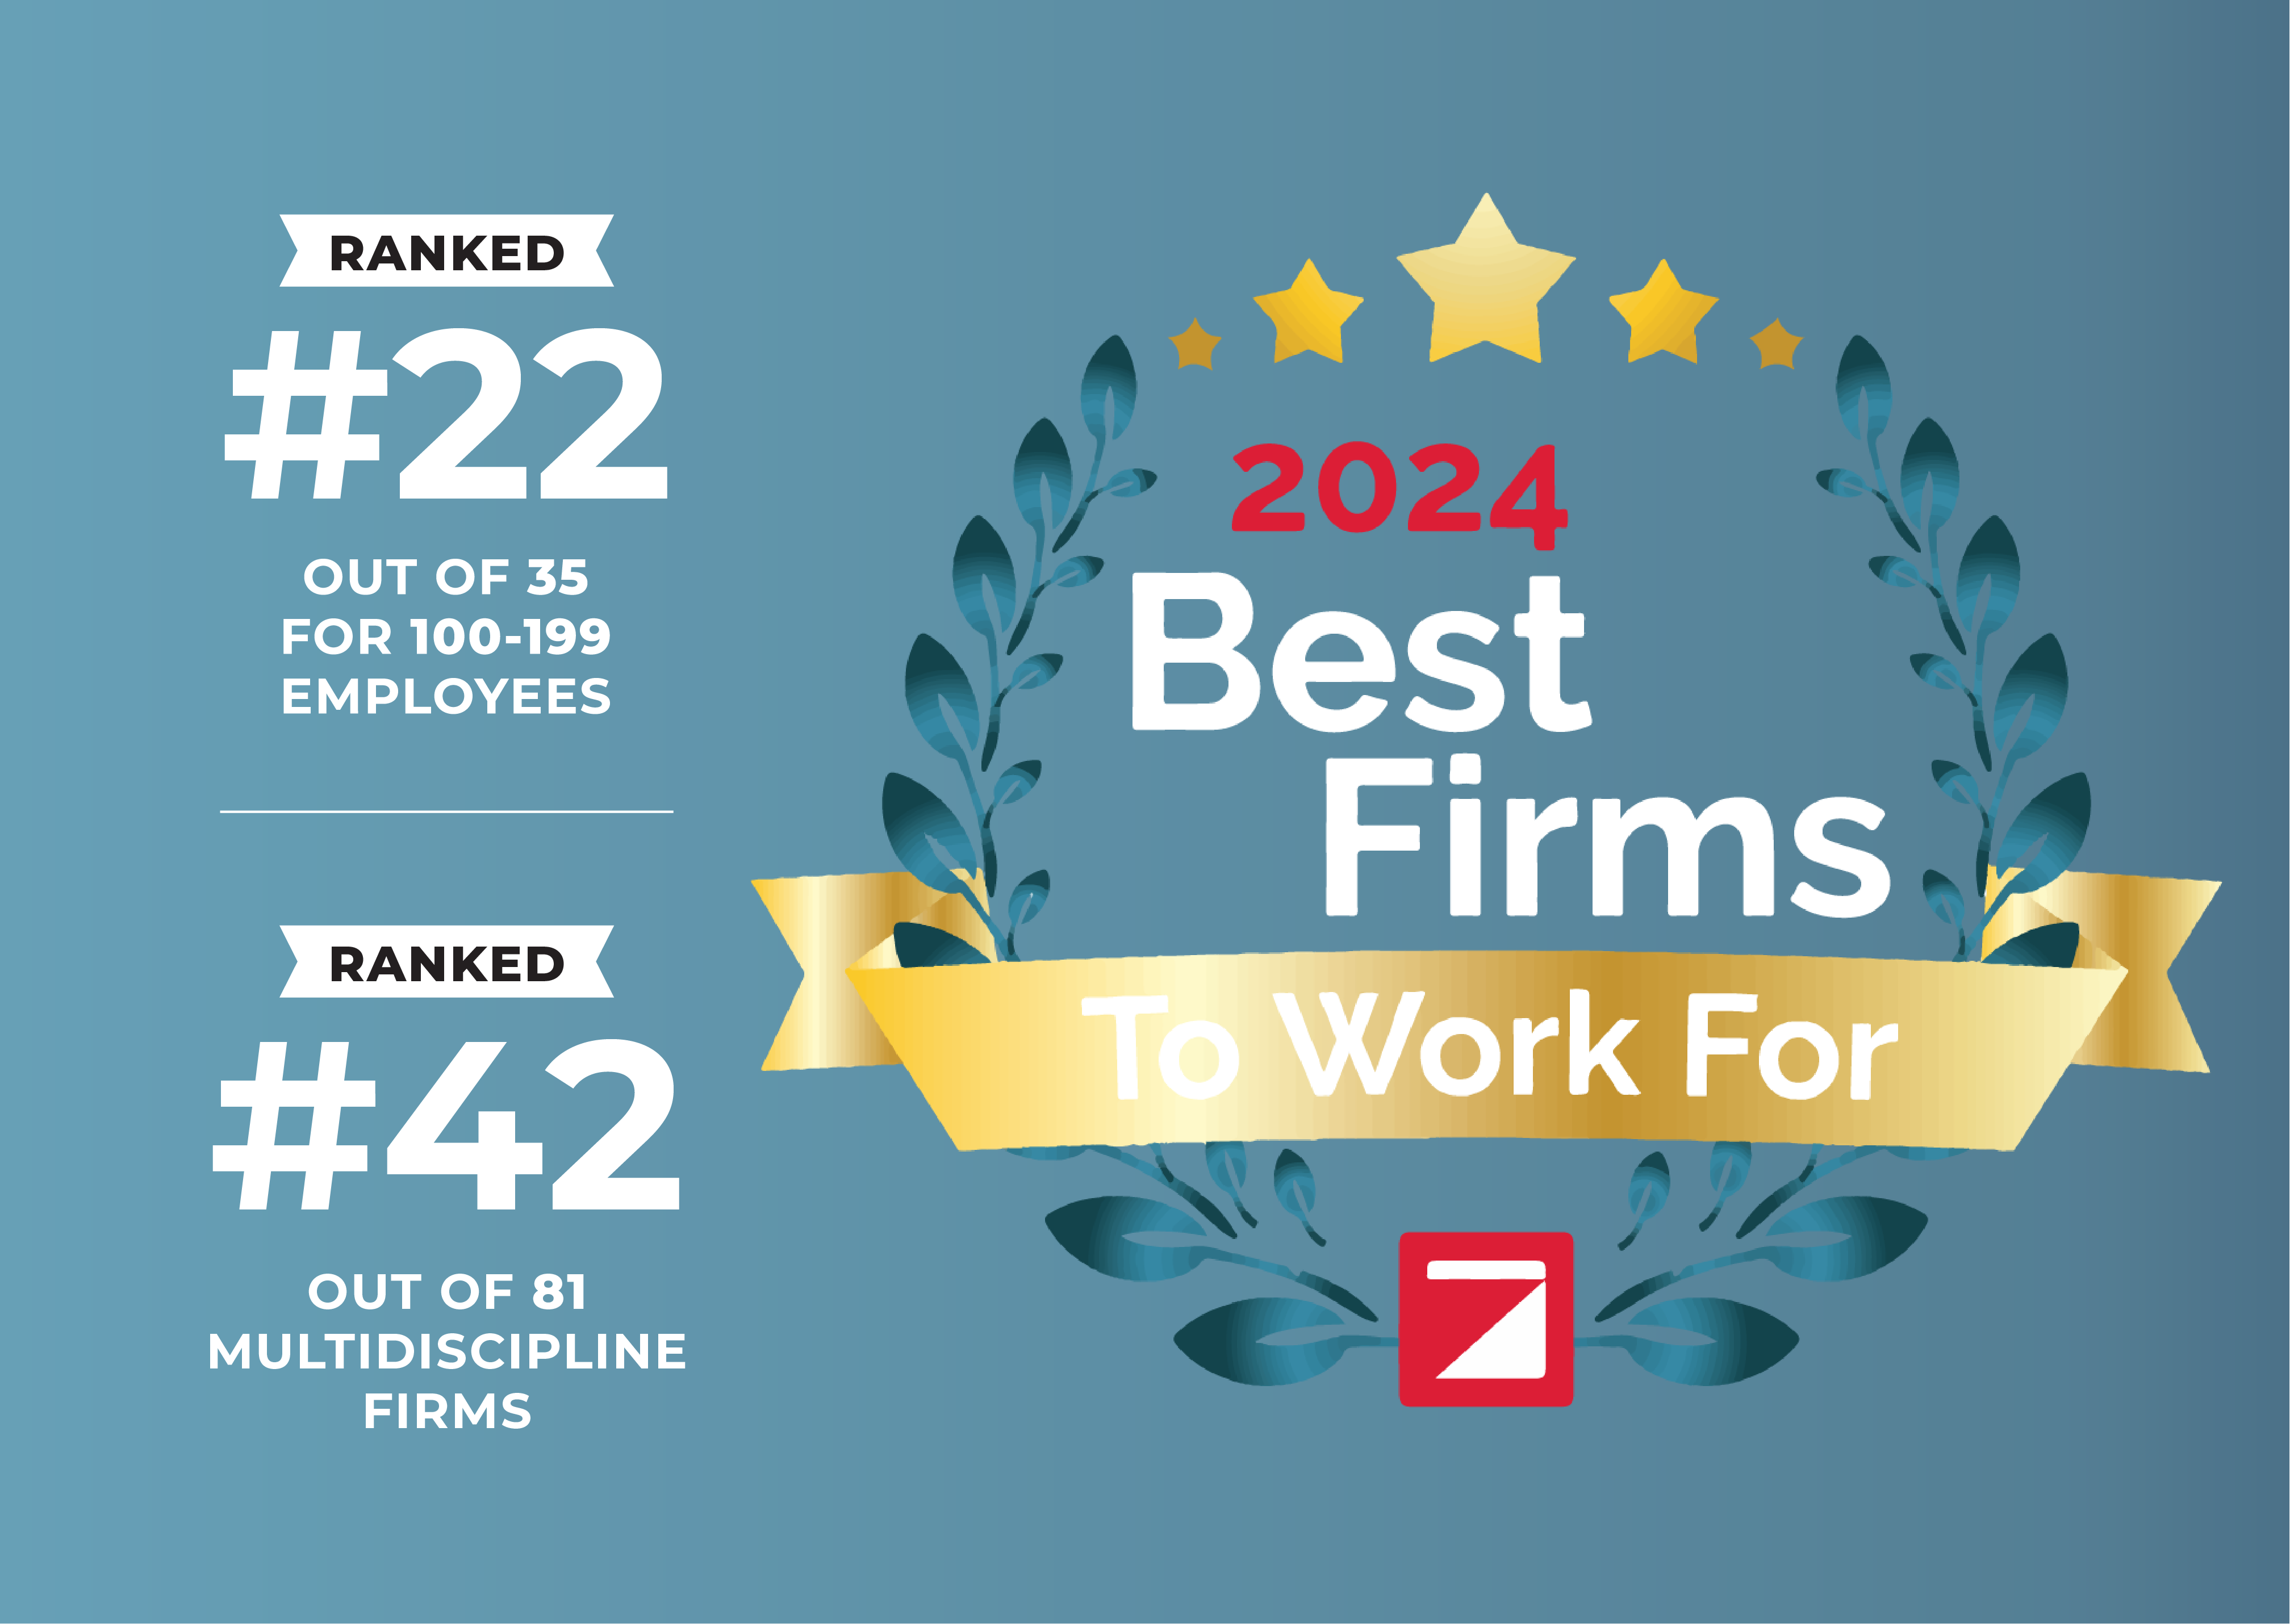 KSA Has Been Recognized as a Best Firm to Work For